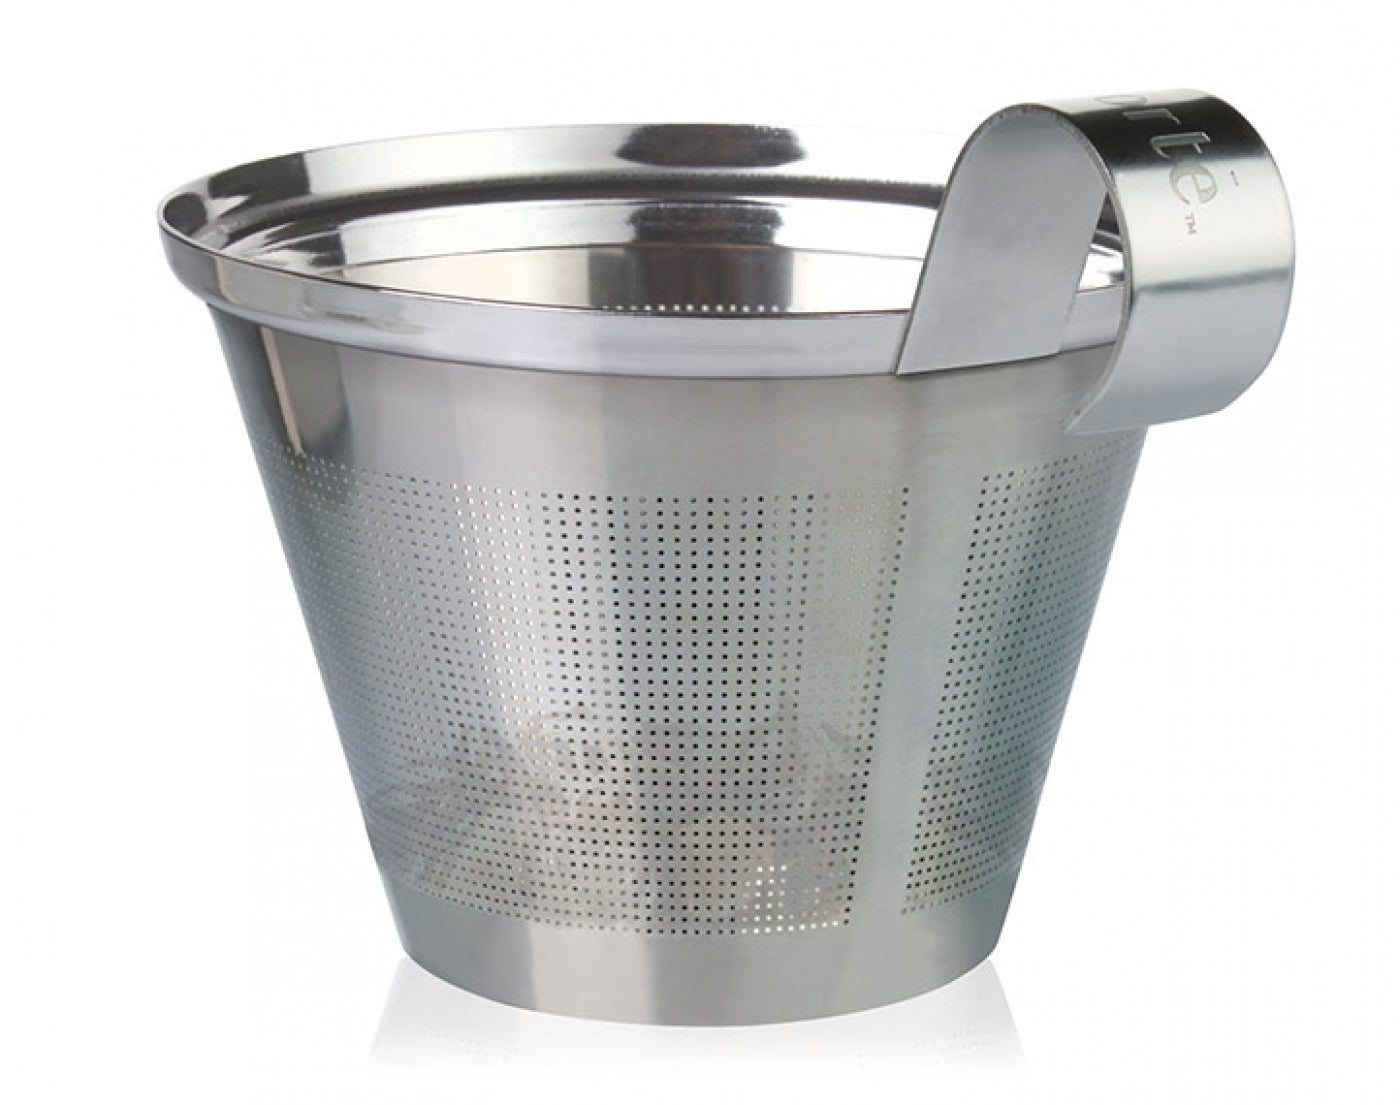 Stainless steel infuser replacement for KATI® steeping cup showing closeup of stainless steel infuser